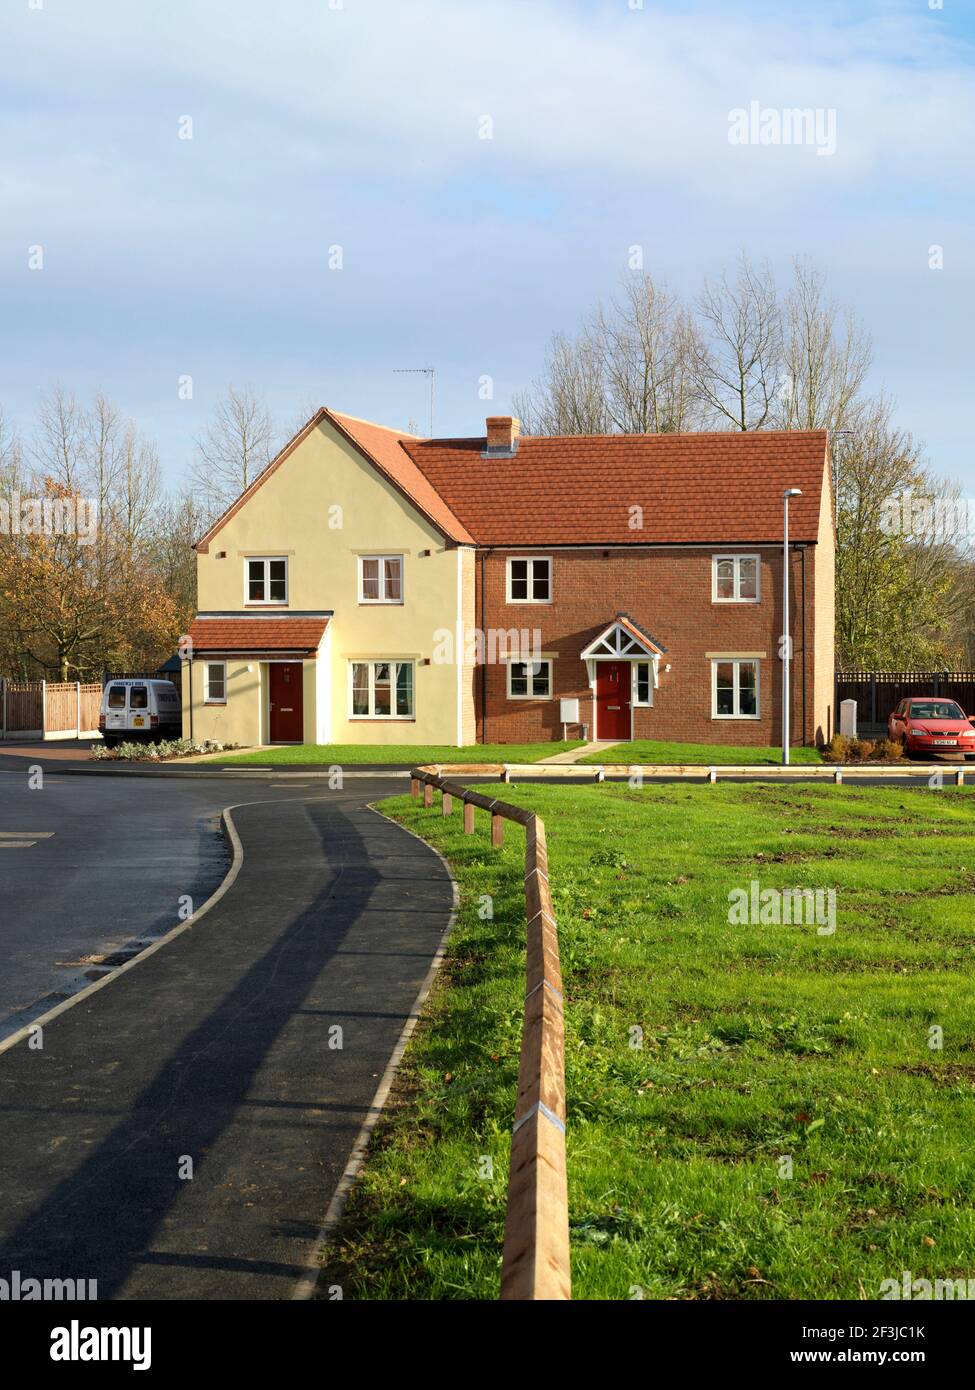 Jephson Shipston-on-Stour, New social housing built by Wates Living Space in Shipston-on-Stour, Warwickshire Stock Photo